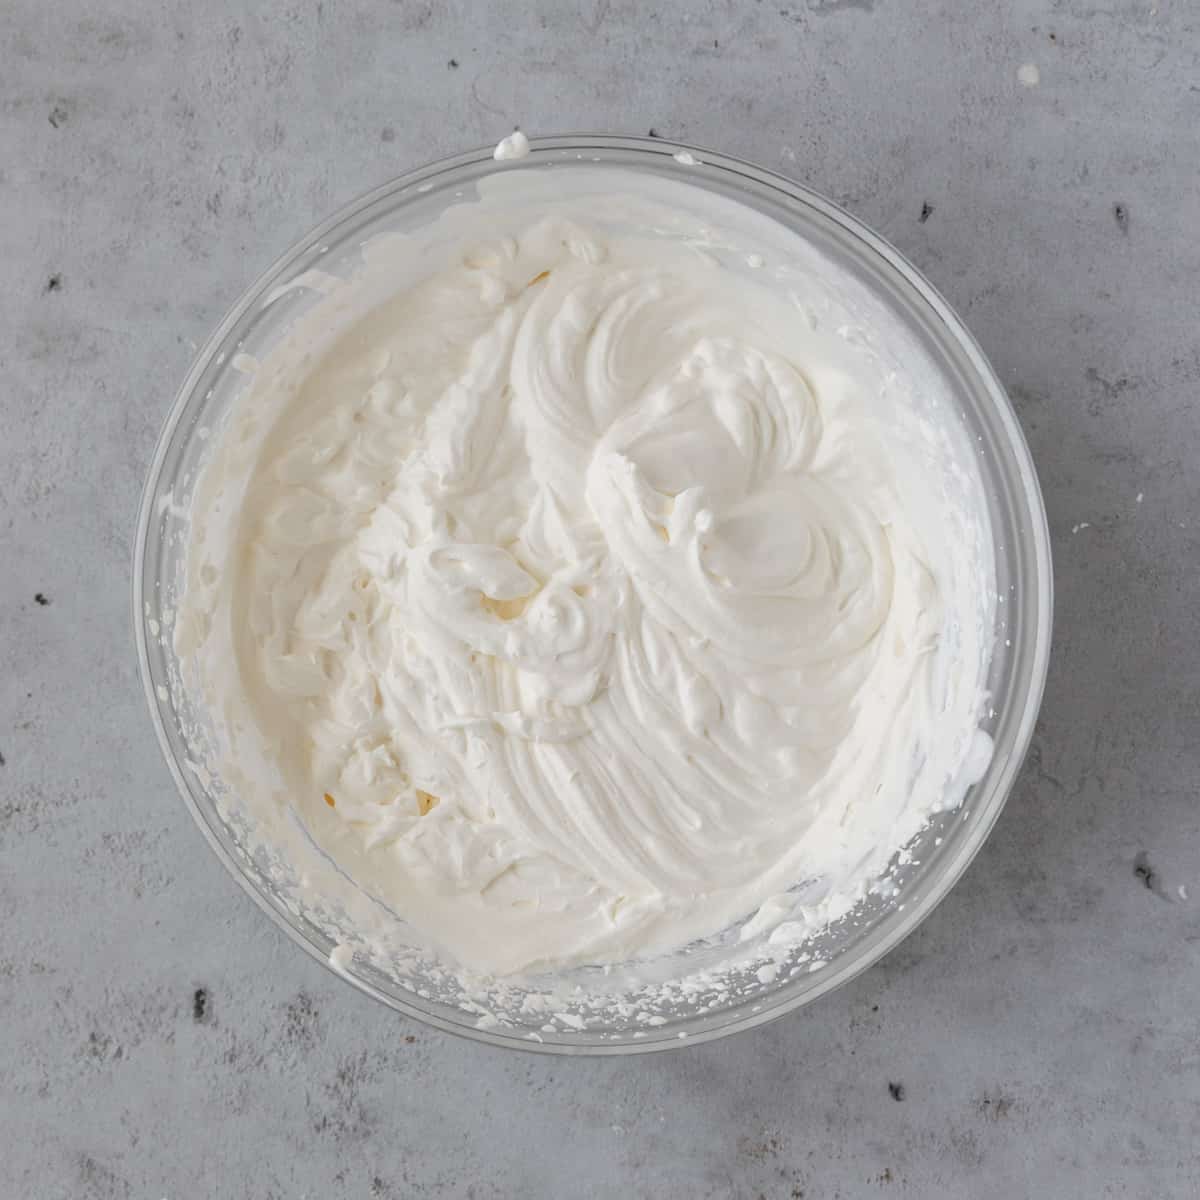 the completed whipped cream in a glass bowl on a grey background